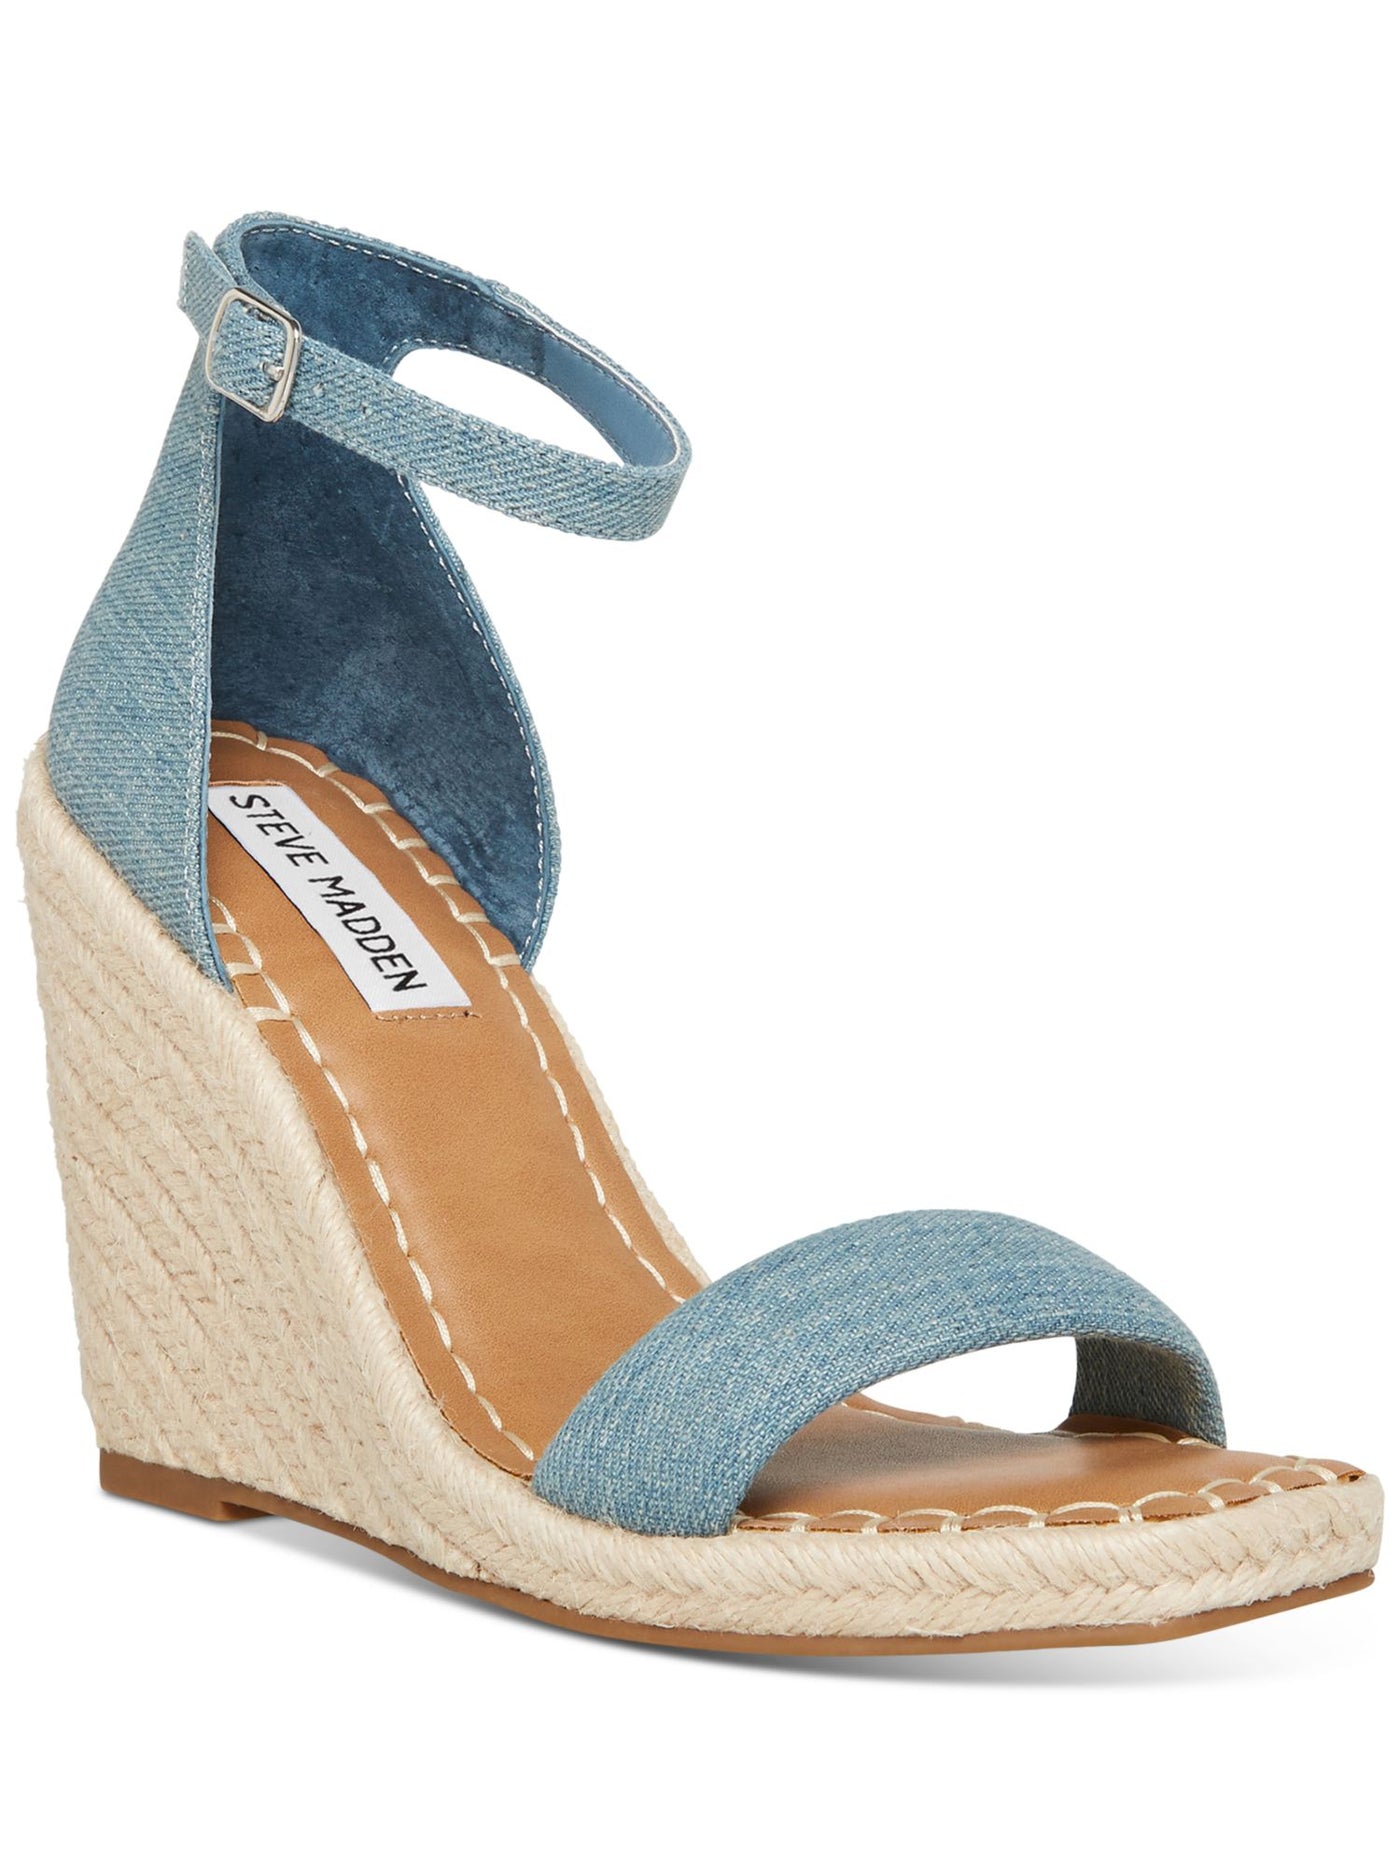 STEVE MADDEN Womens Blue Cushioned Woven 1/2" Platform Adjustable Strap Ankle Strap Submit Square Toe Wedge Buckle Espadrille Shoes 8.5